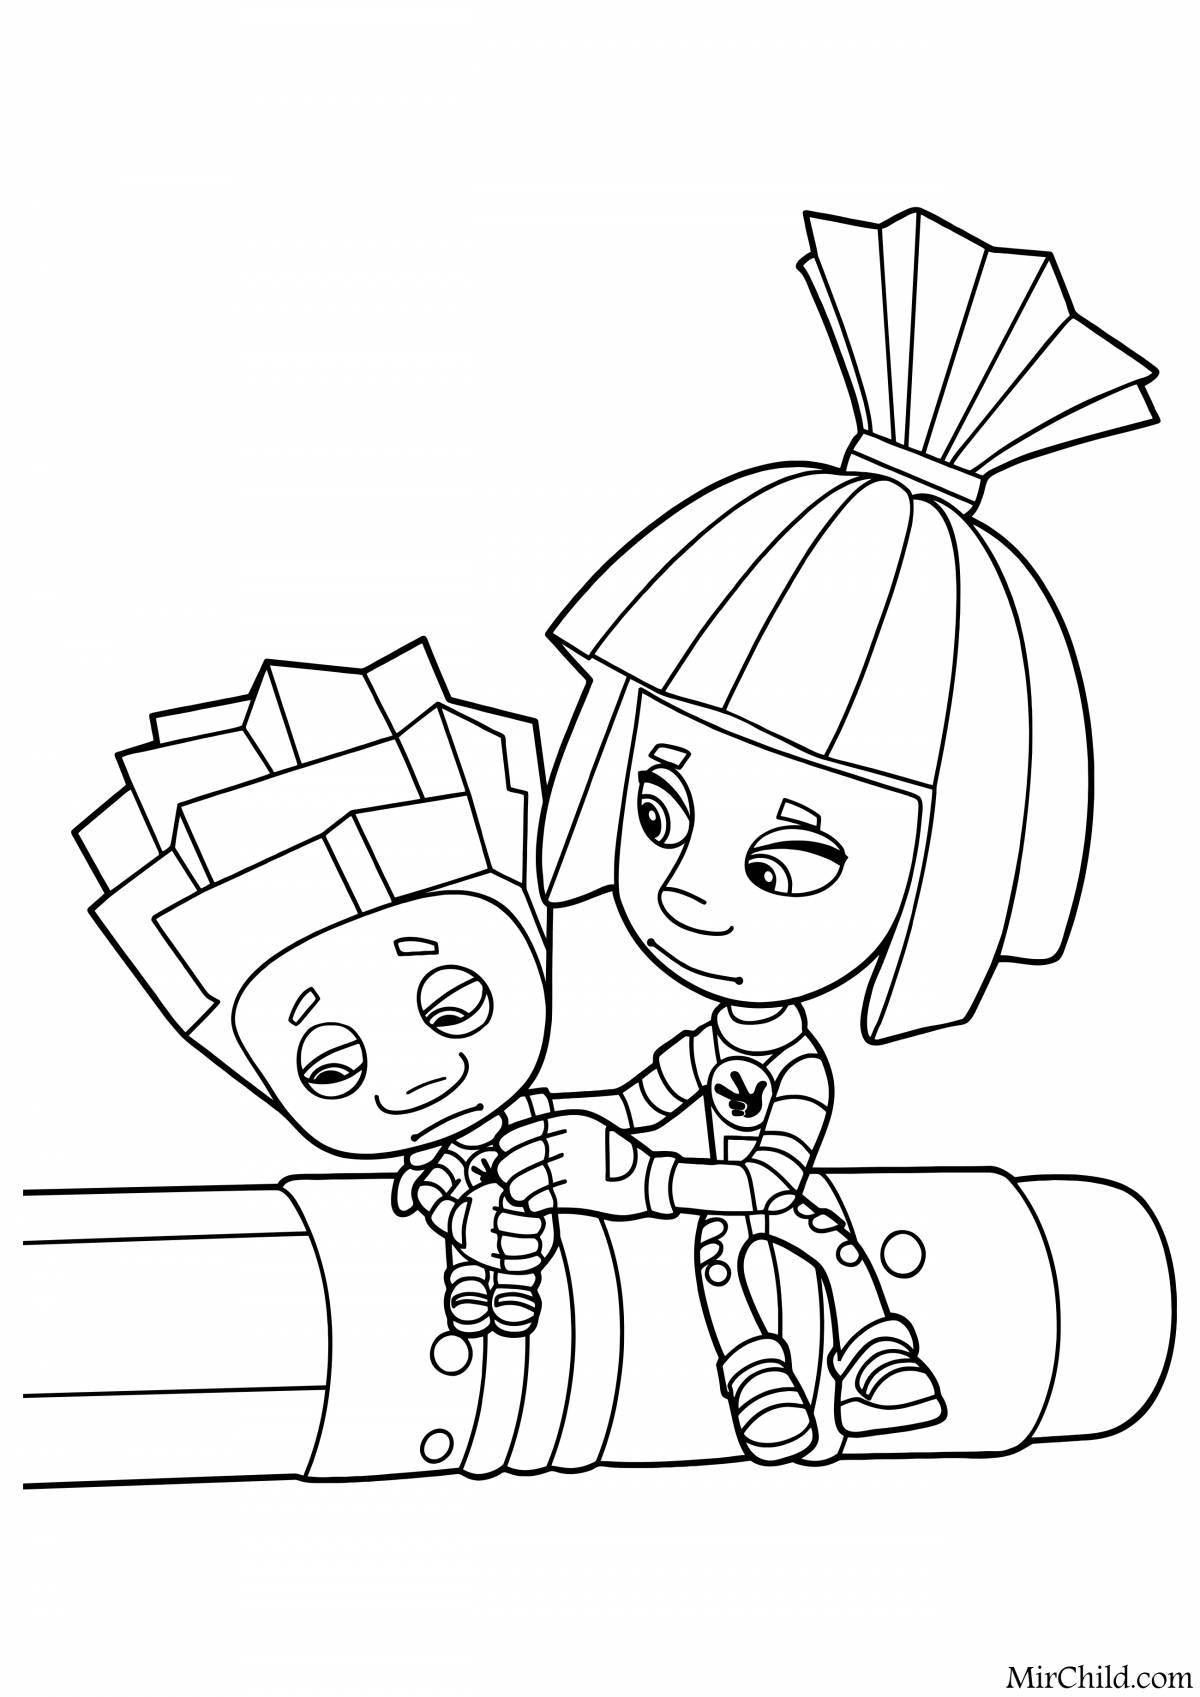 Charming fixies zero coloring page